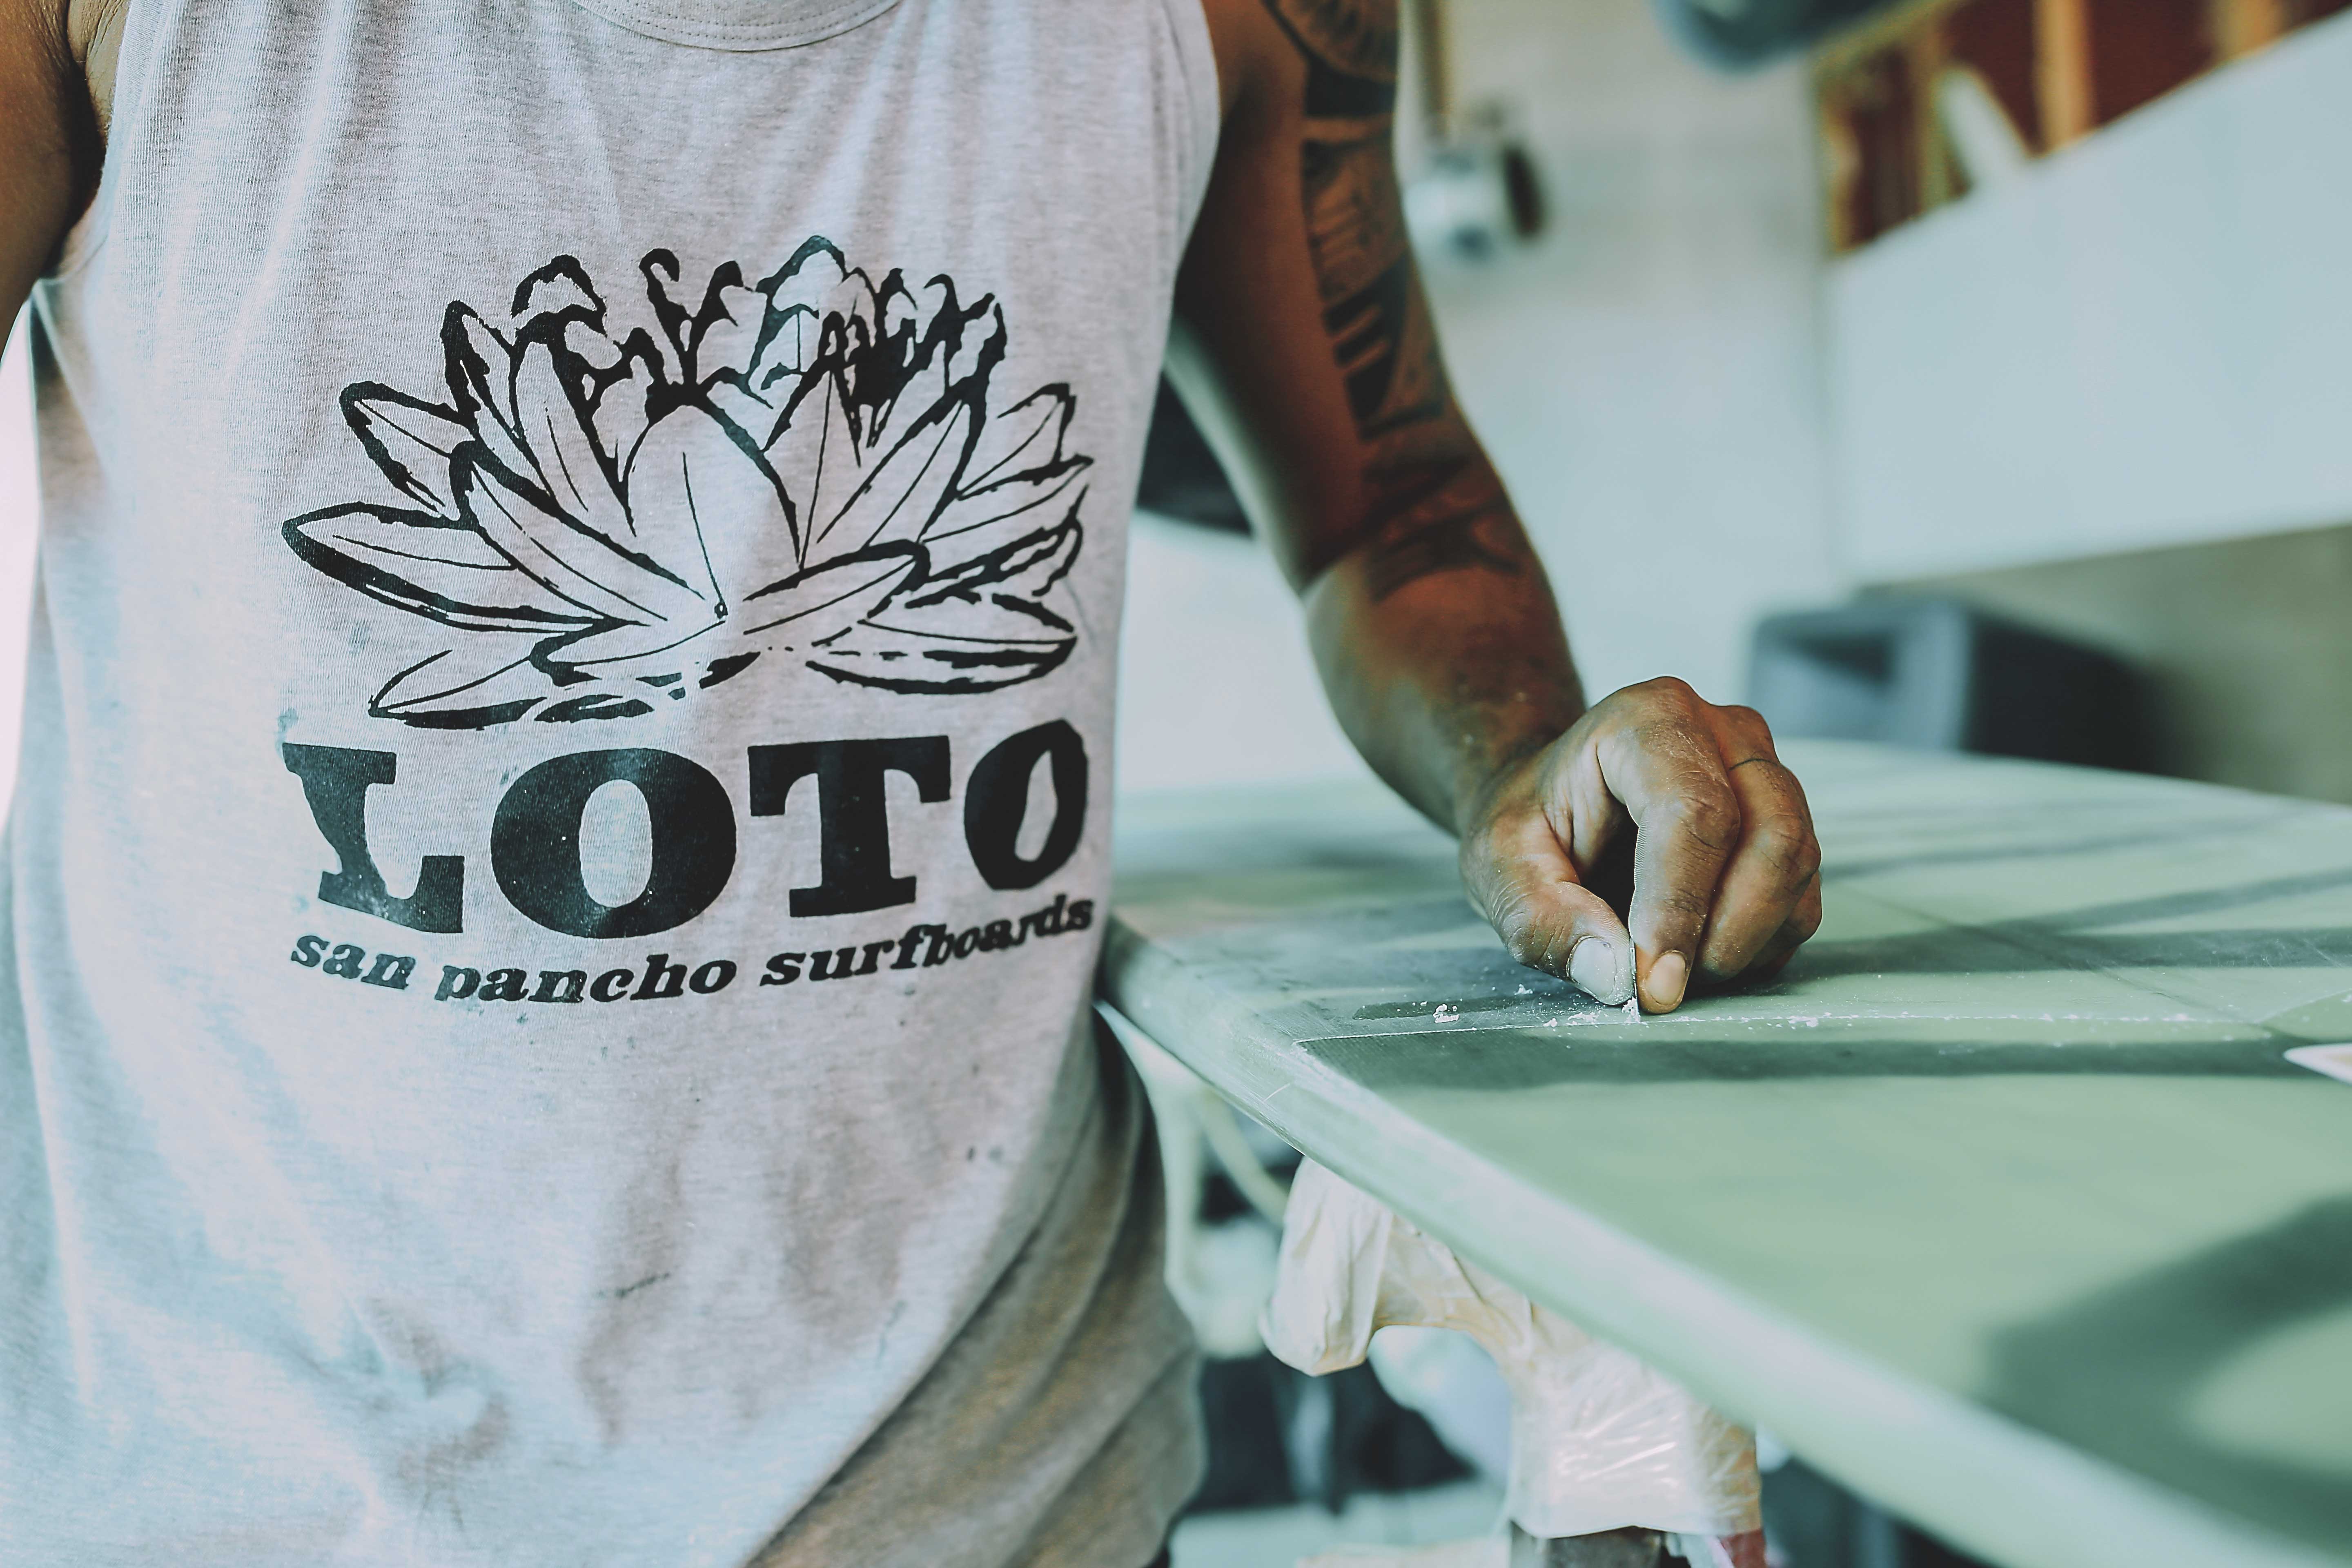 Essentials for the beach created by local talent, lotosurfboards